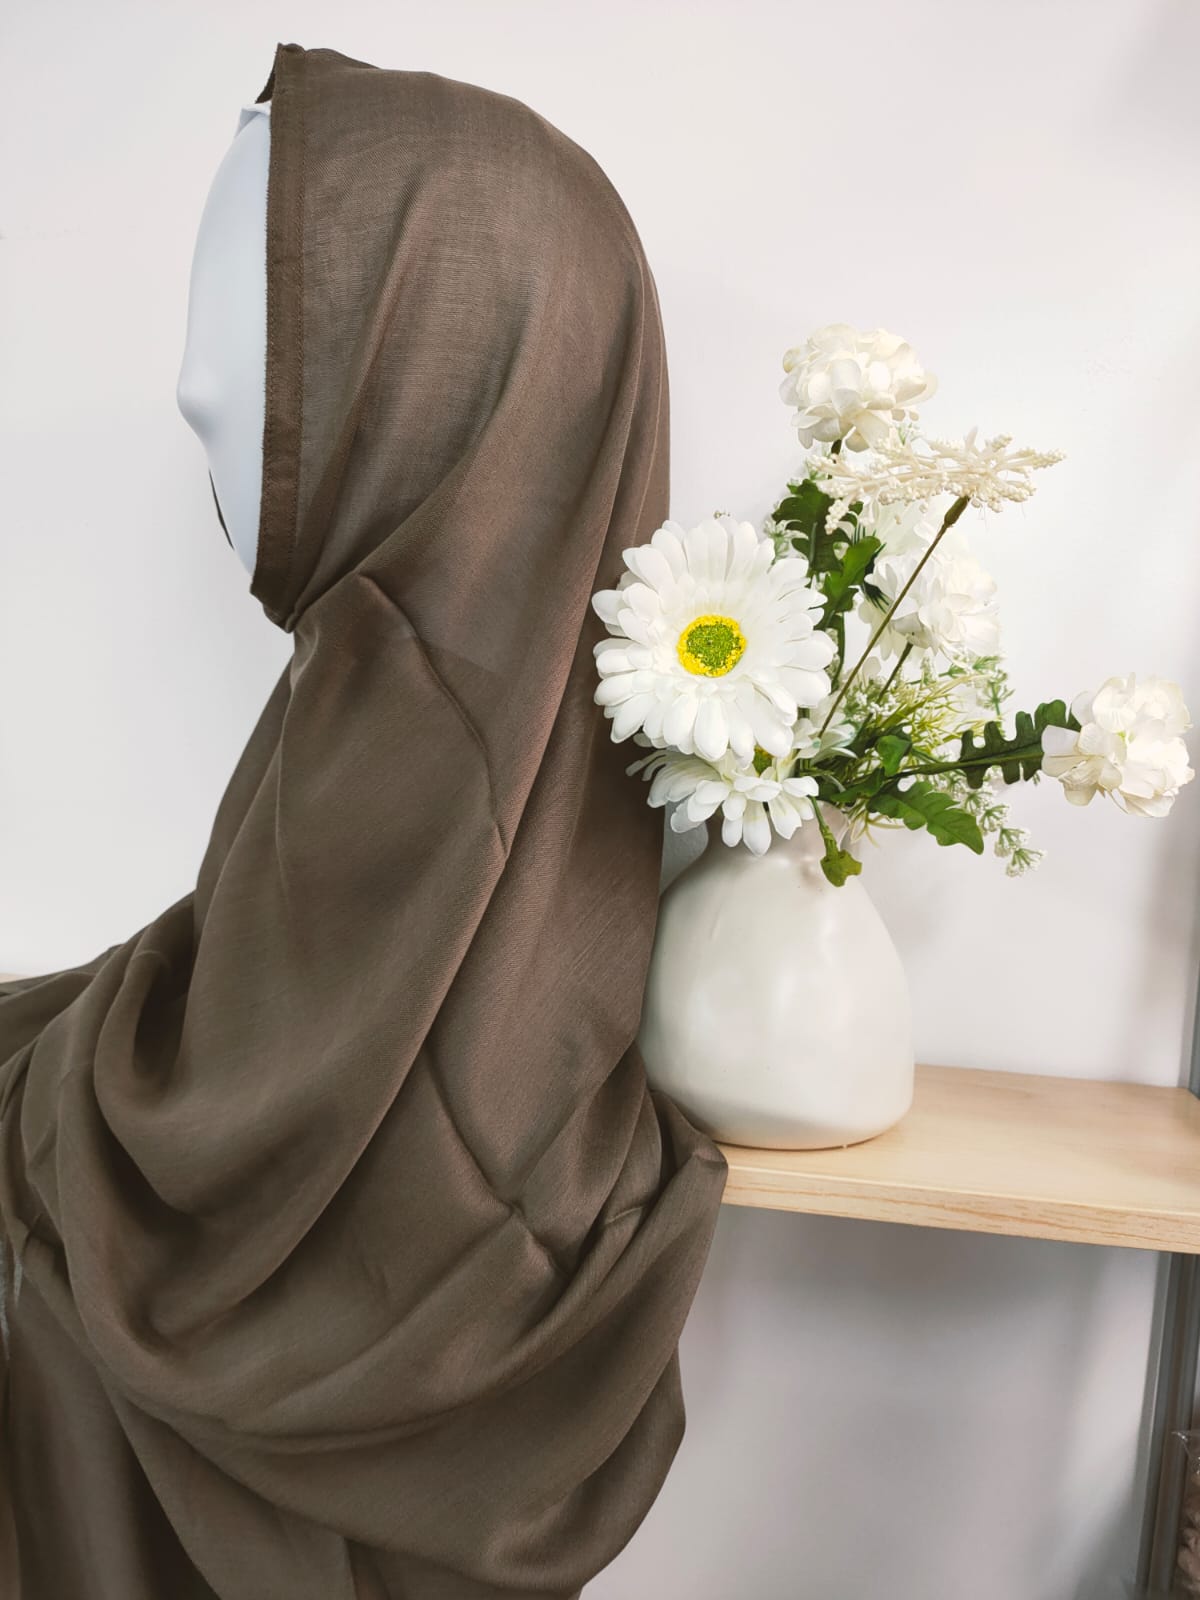 Introducing our modest yet refined Modal Hijab in Coffee, a serene addition to the wardrobe of modest women, exclusively at Hikmah Boutique! Crafted with care from premium modal fabric, this modal hijab is known for its gentle touch and breathability. Based in Australia, Deliver Worldwide.